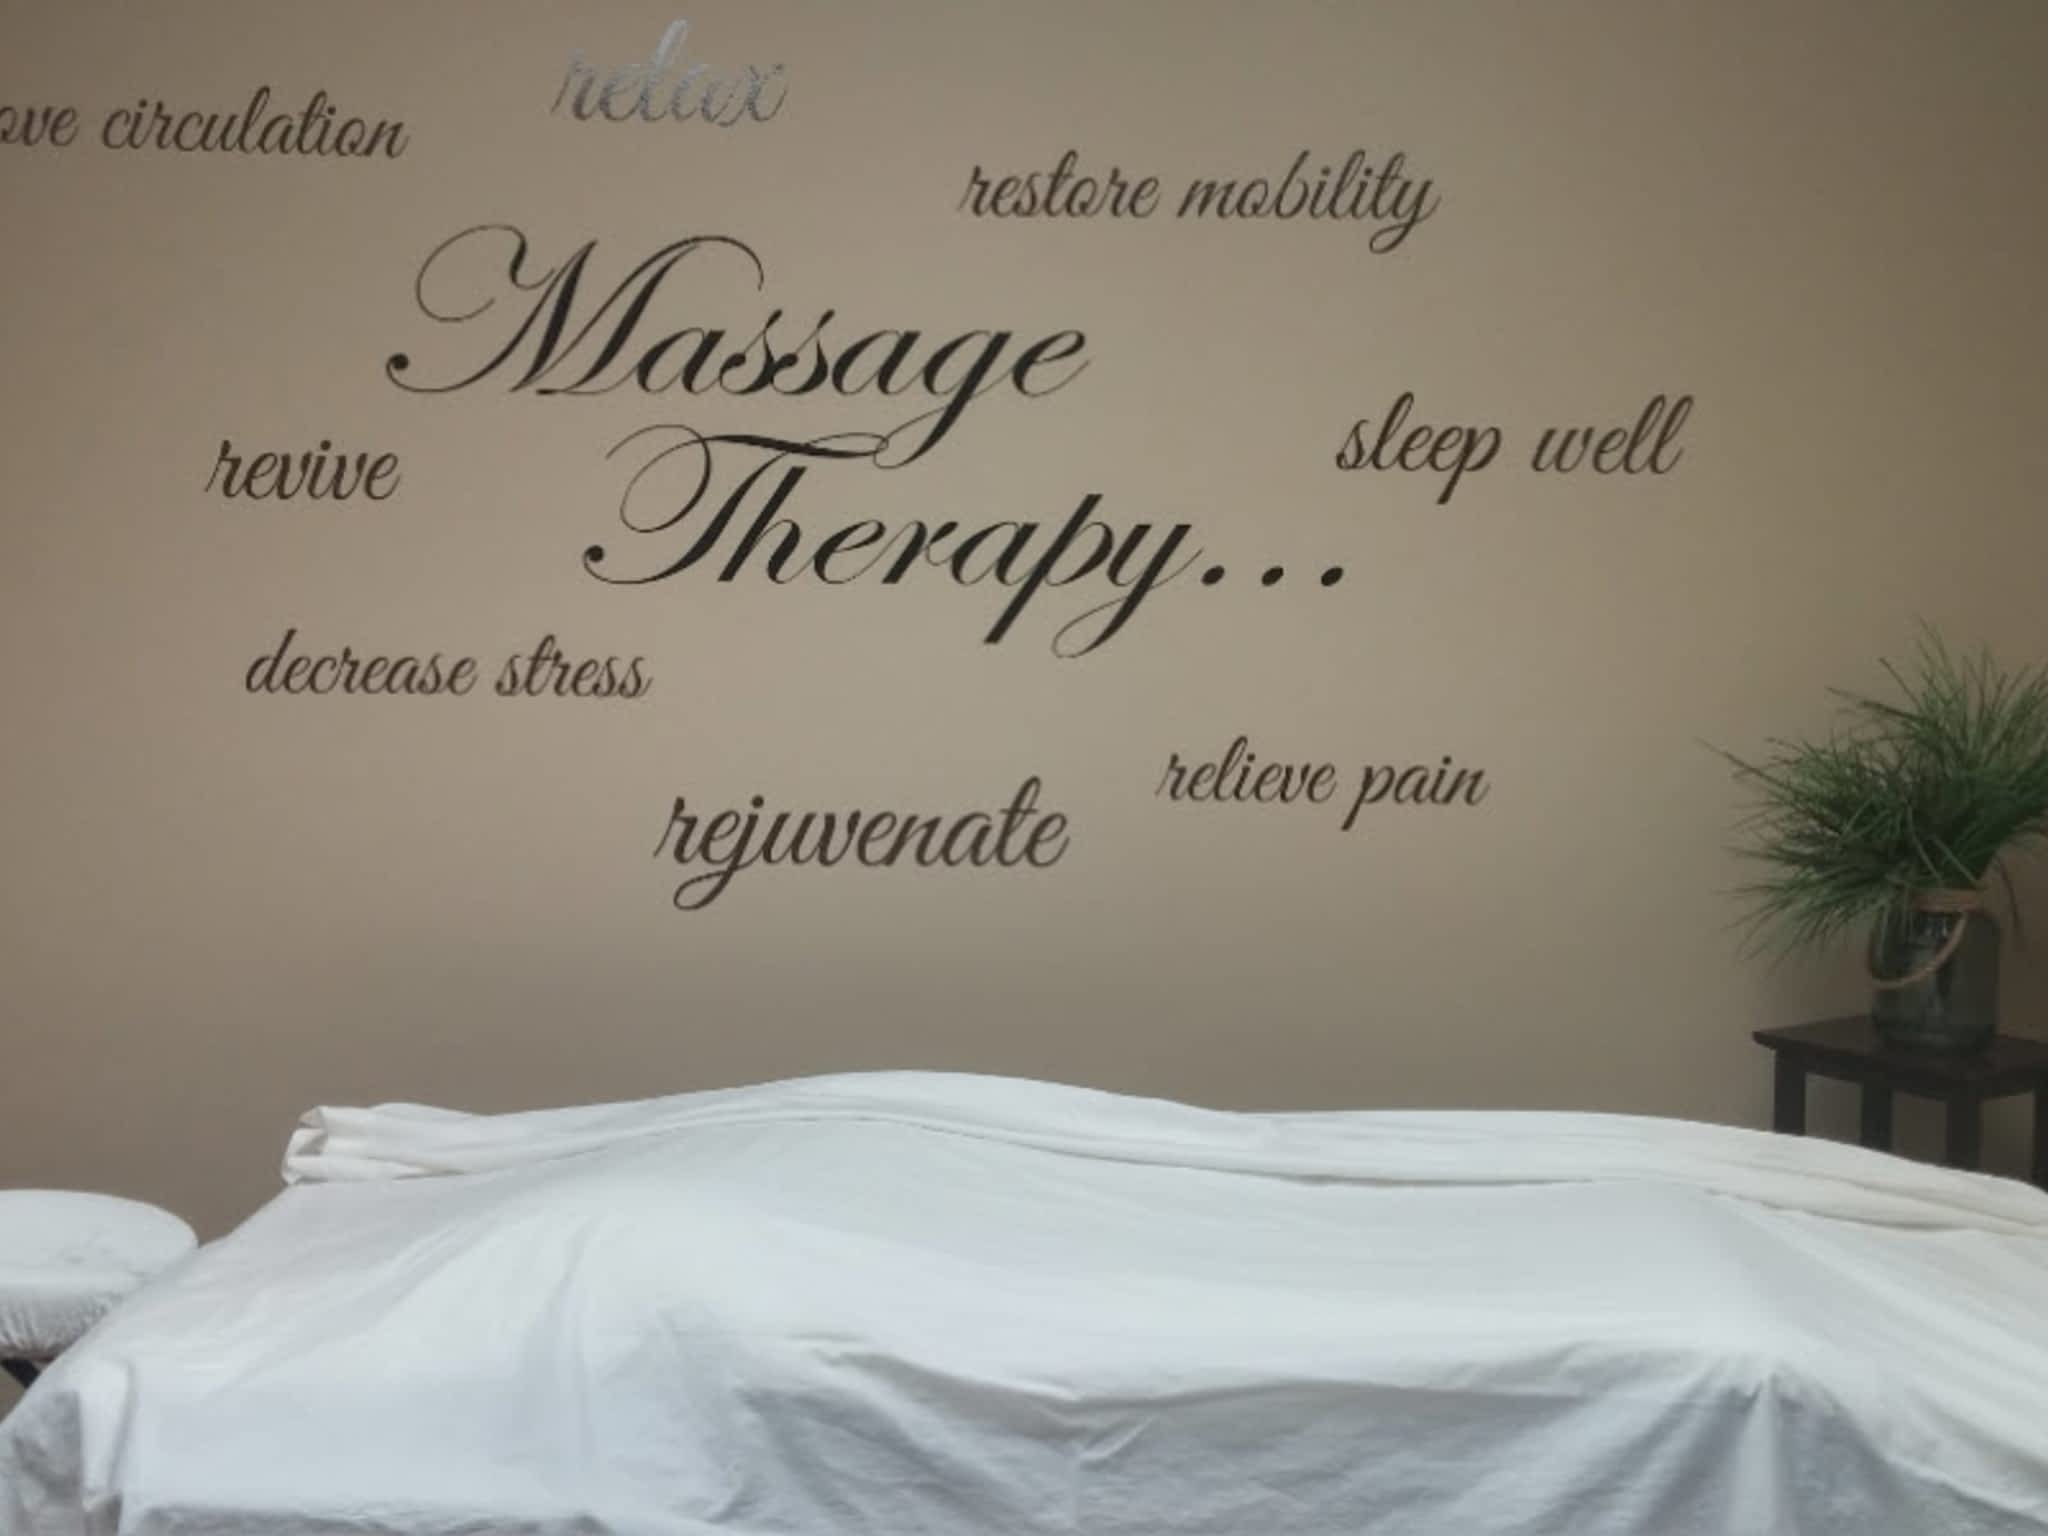 photo Sandra Blair Registered Massage and Laser Therapy